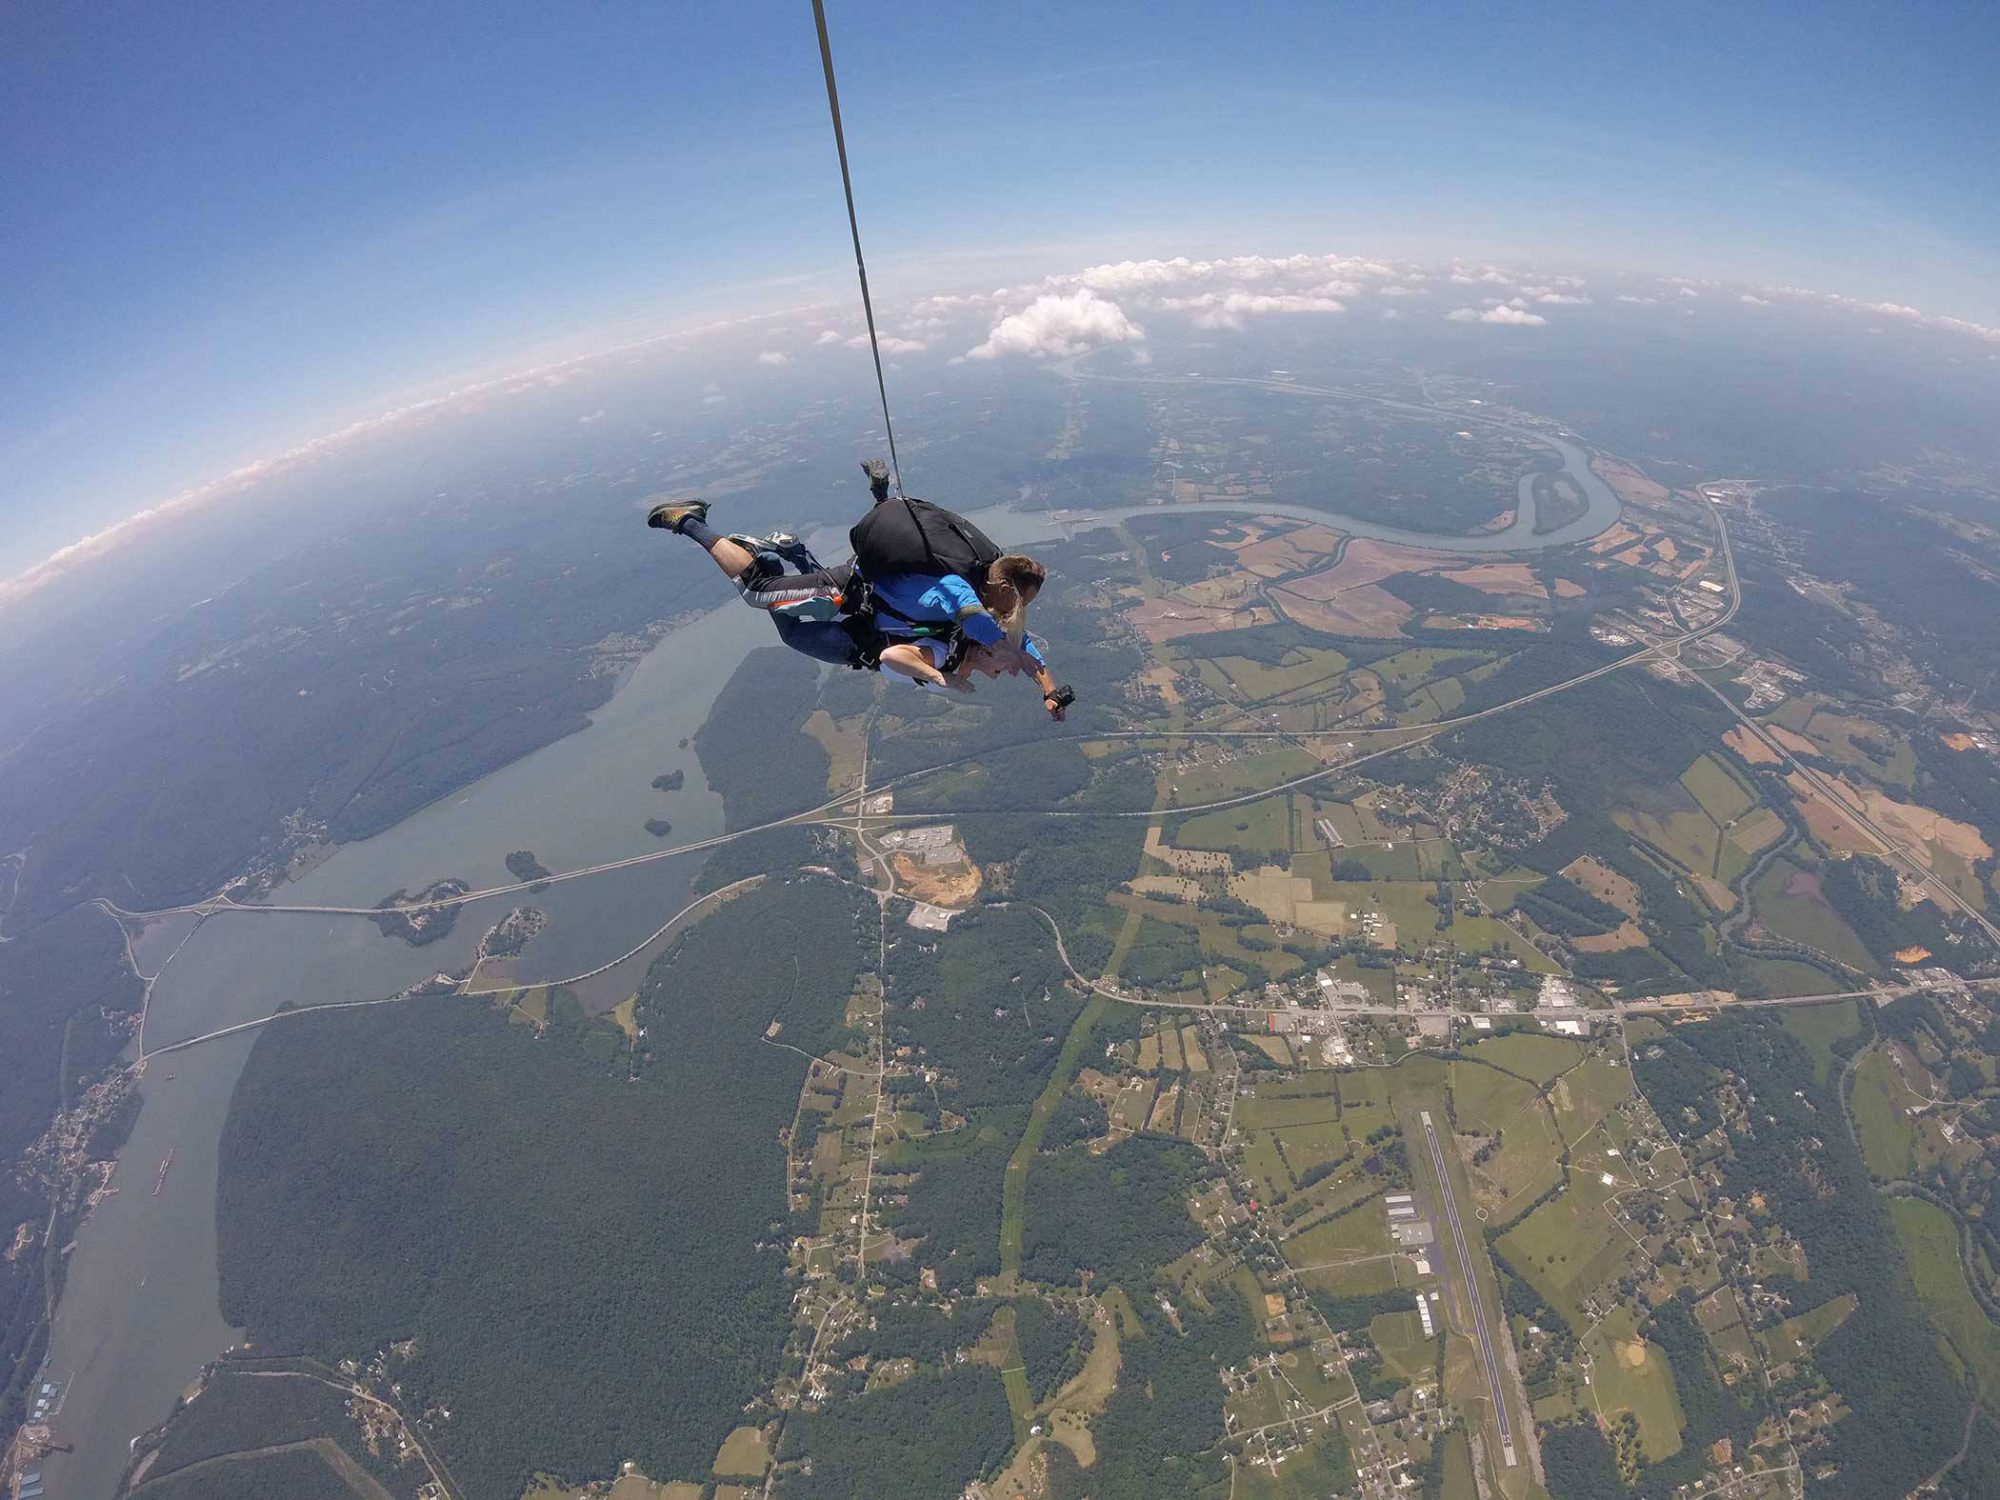 Tennessee Skydiving Prices Near Atlanta Ga Chattanooga Skydiving Company